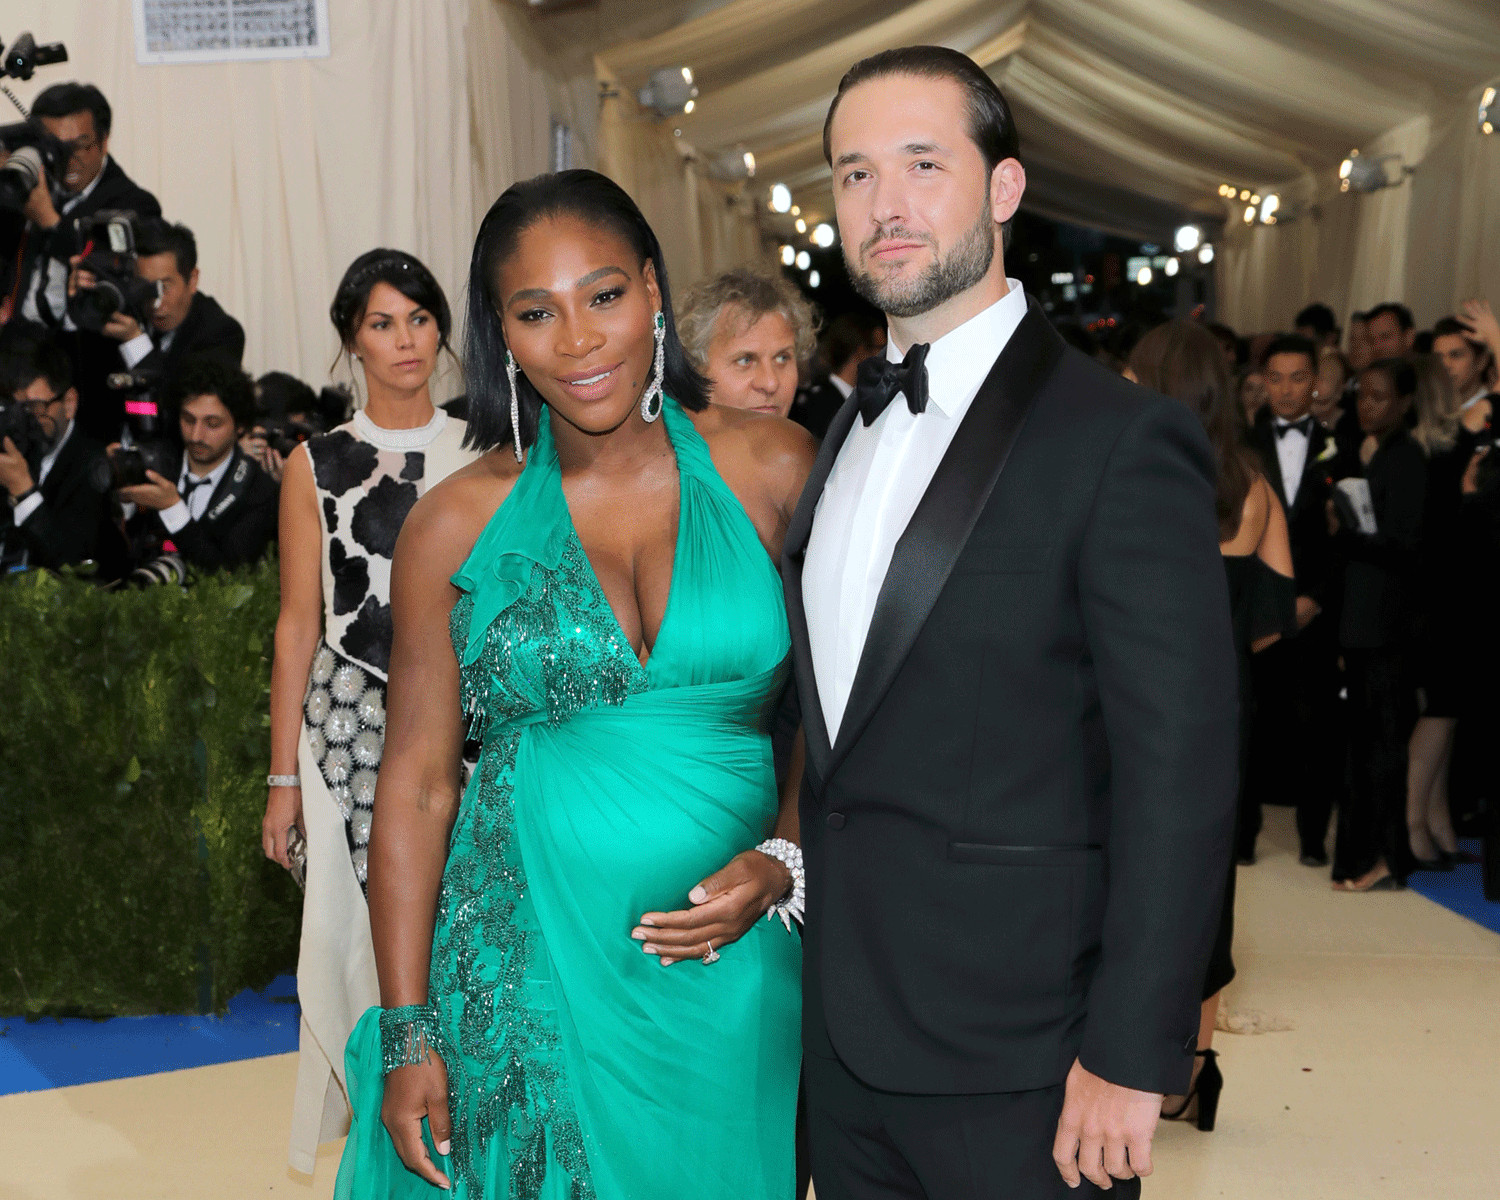 Alexis Ohanian Hochzeit
 Serena Williams Marries Reddit Co Founder Alexis Ohanian